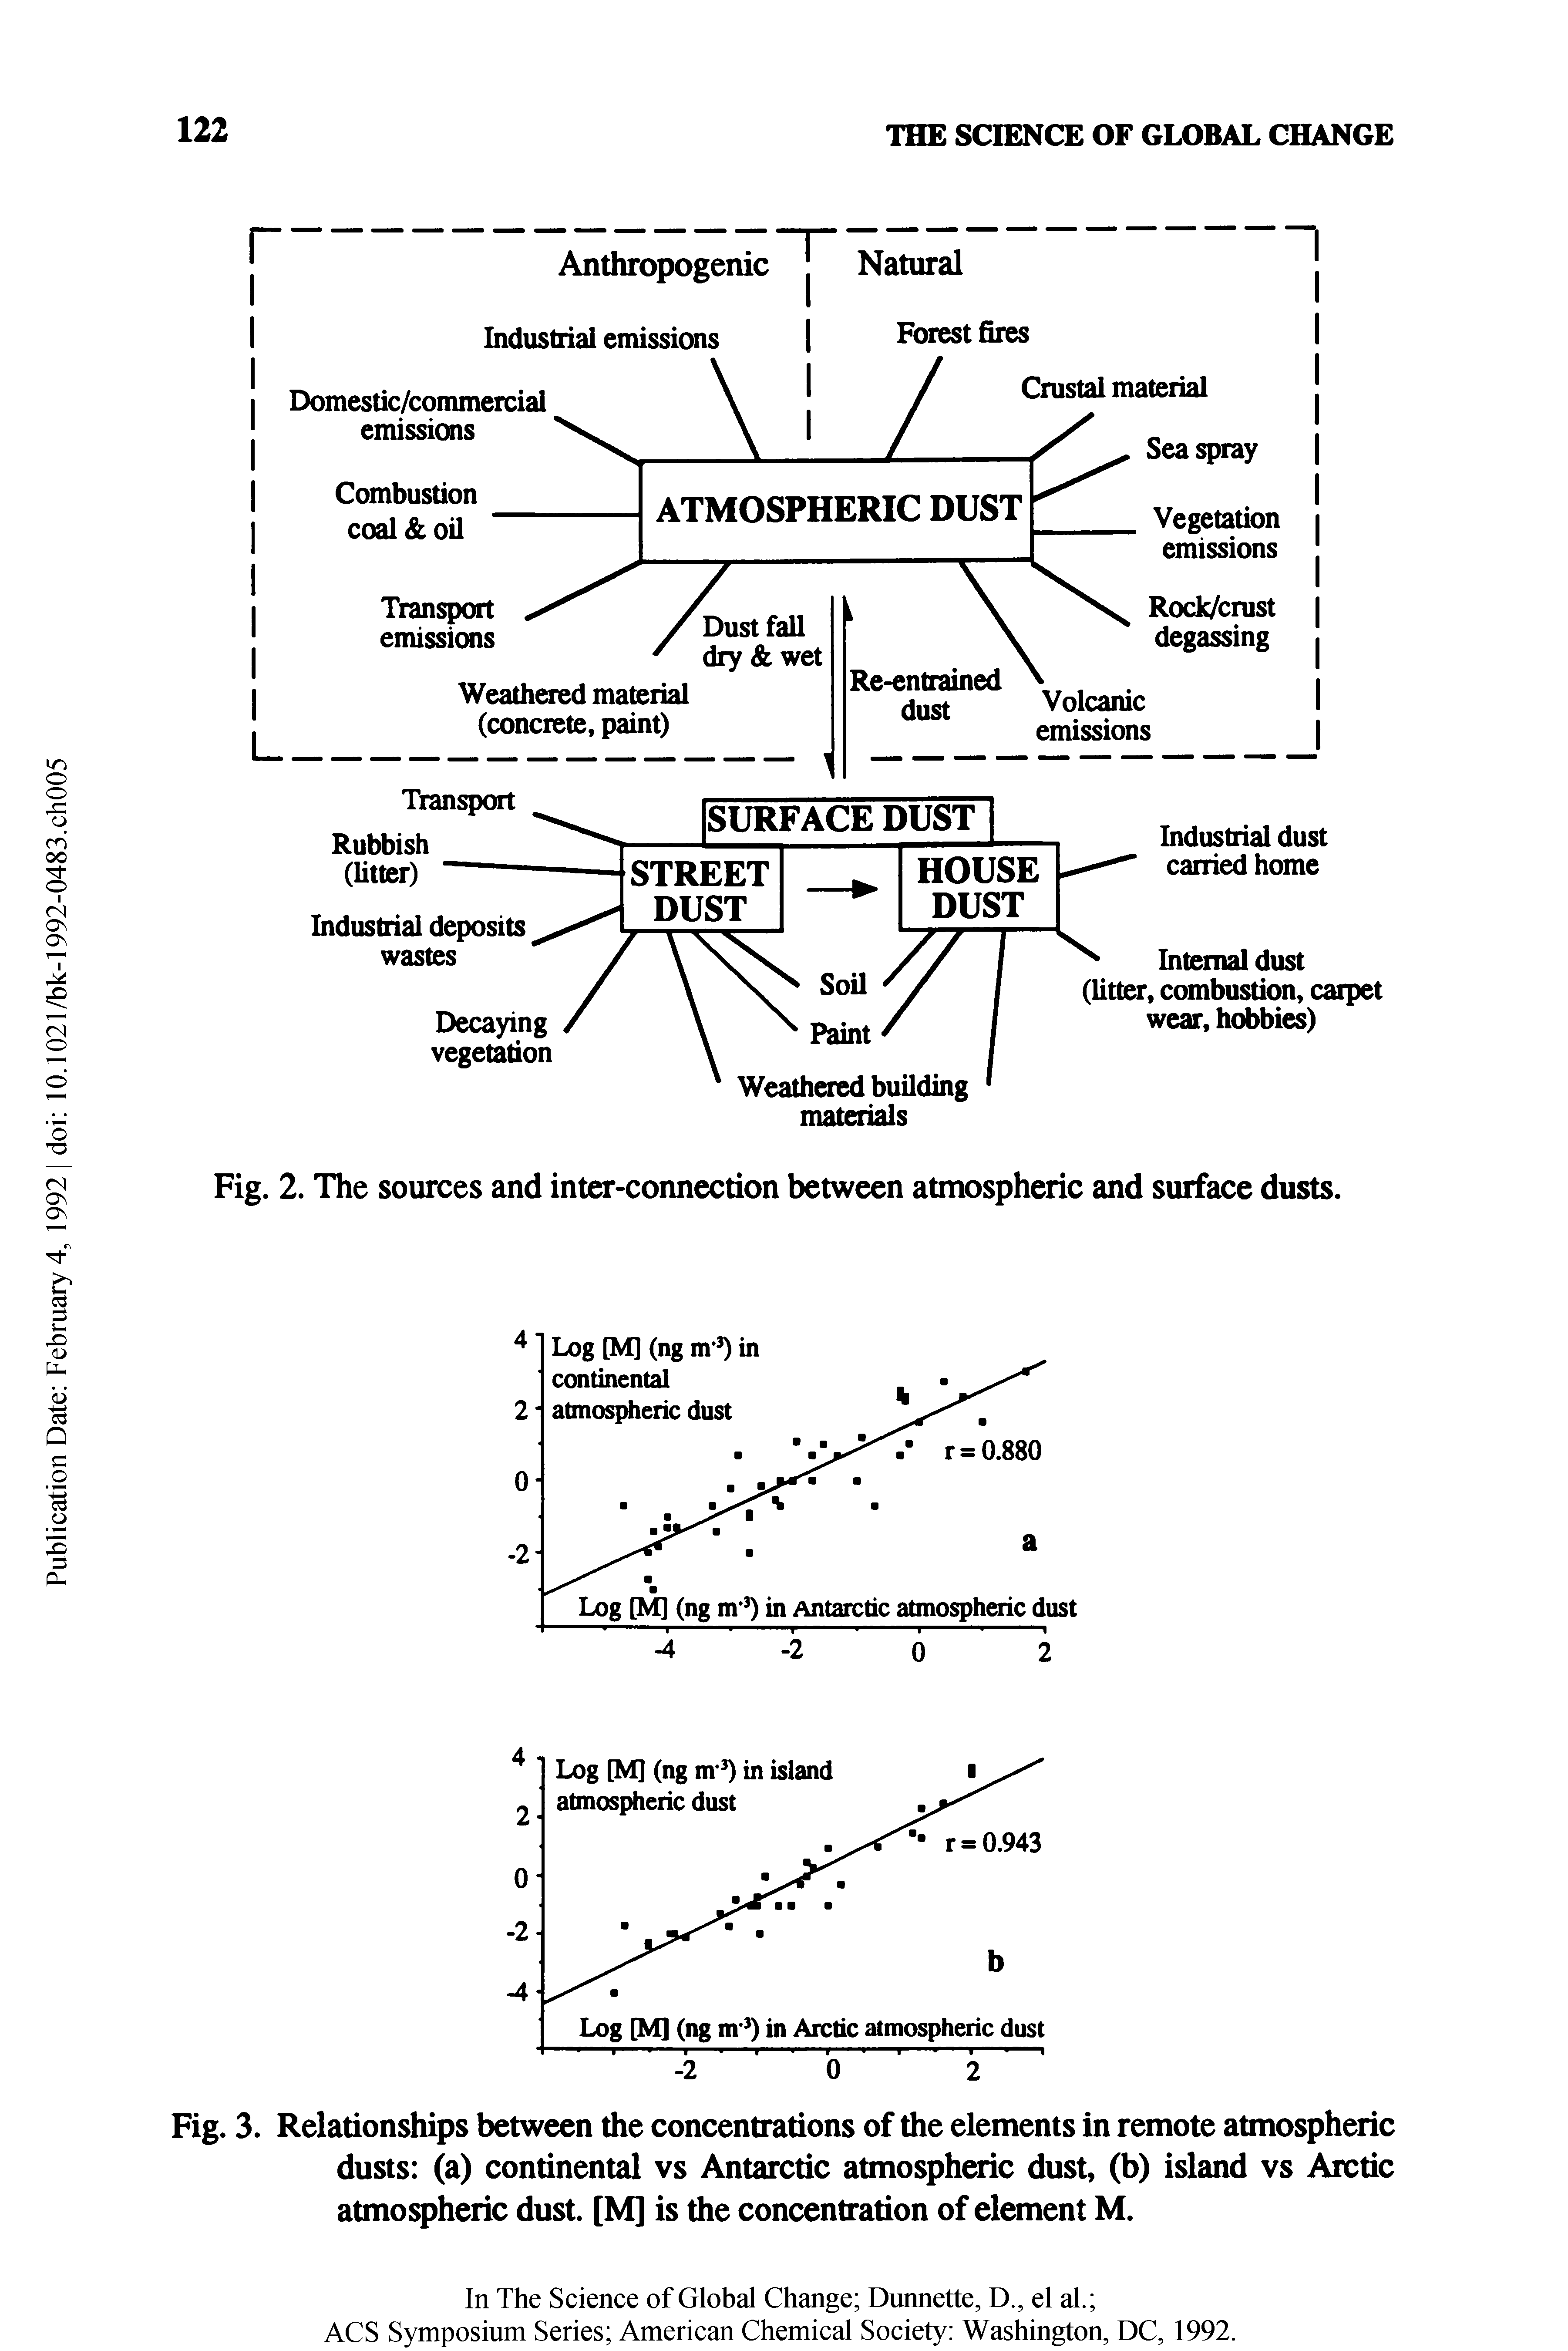 Fig. 2. The sources and inter-connection between atmospheric and surface dusts.